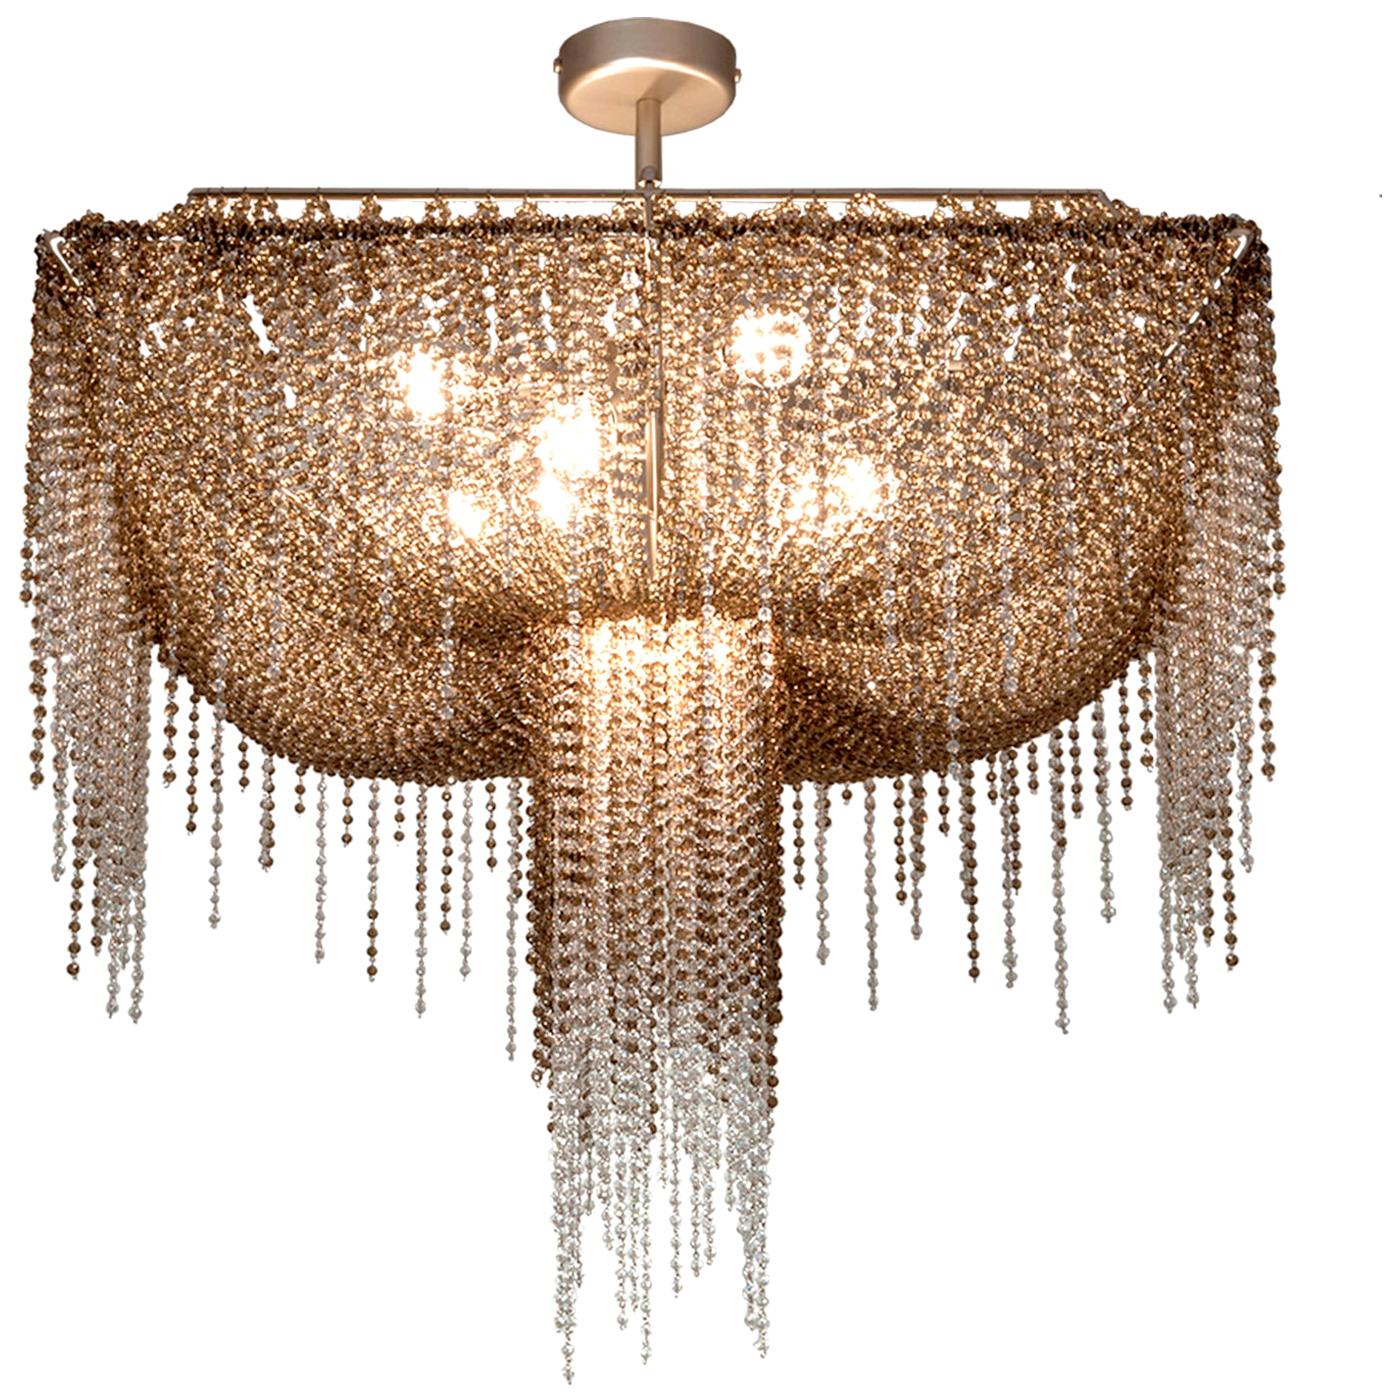 21st Century Burlesque Champagne Chandelier and Crystals by Patrizia Garganti For Sale